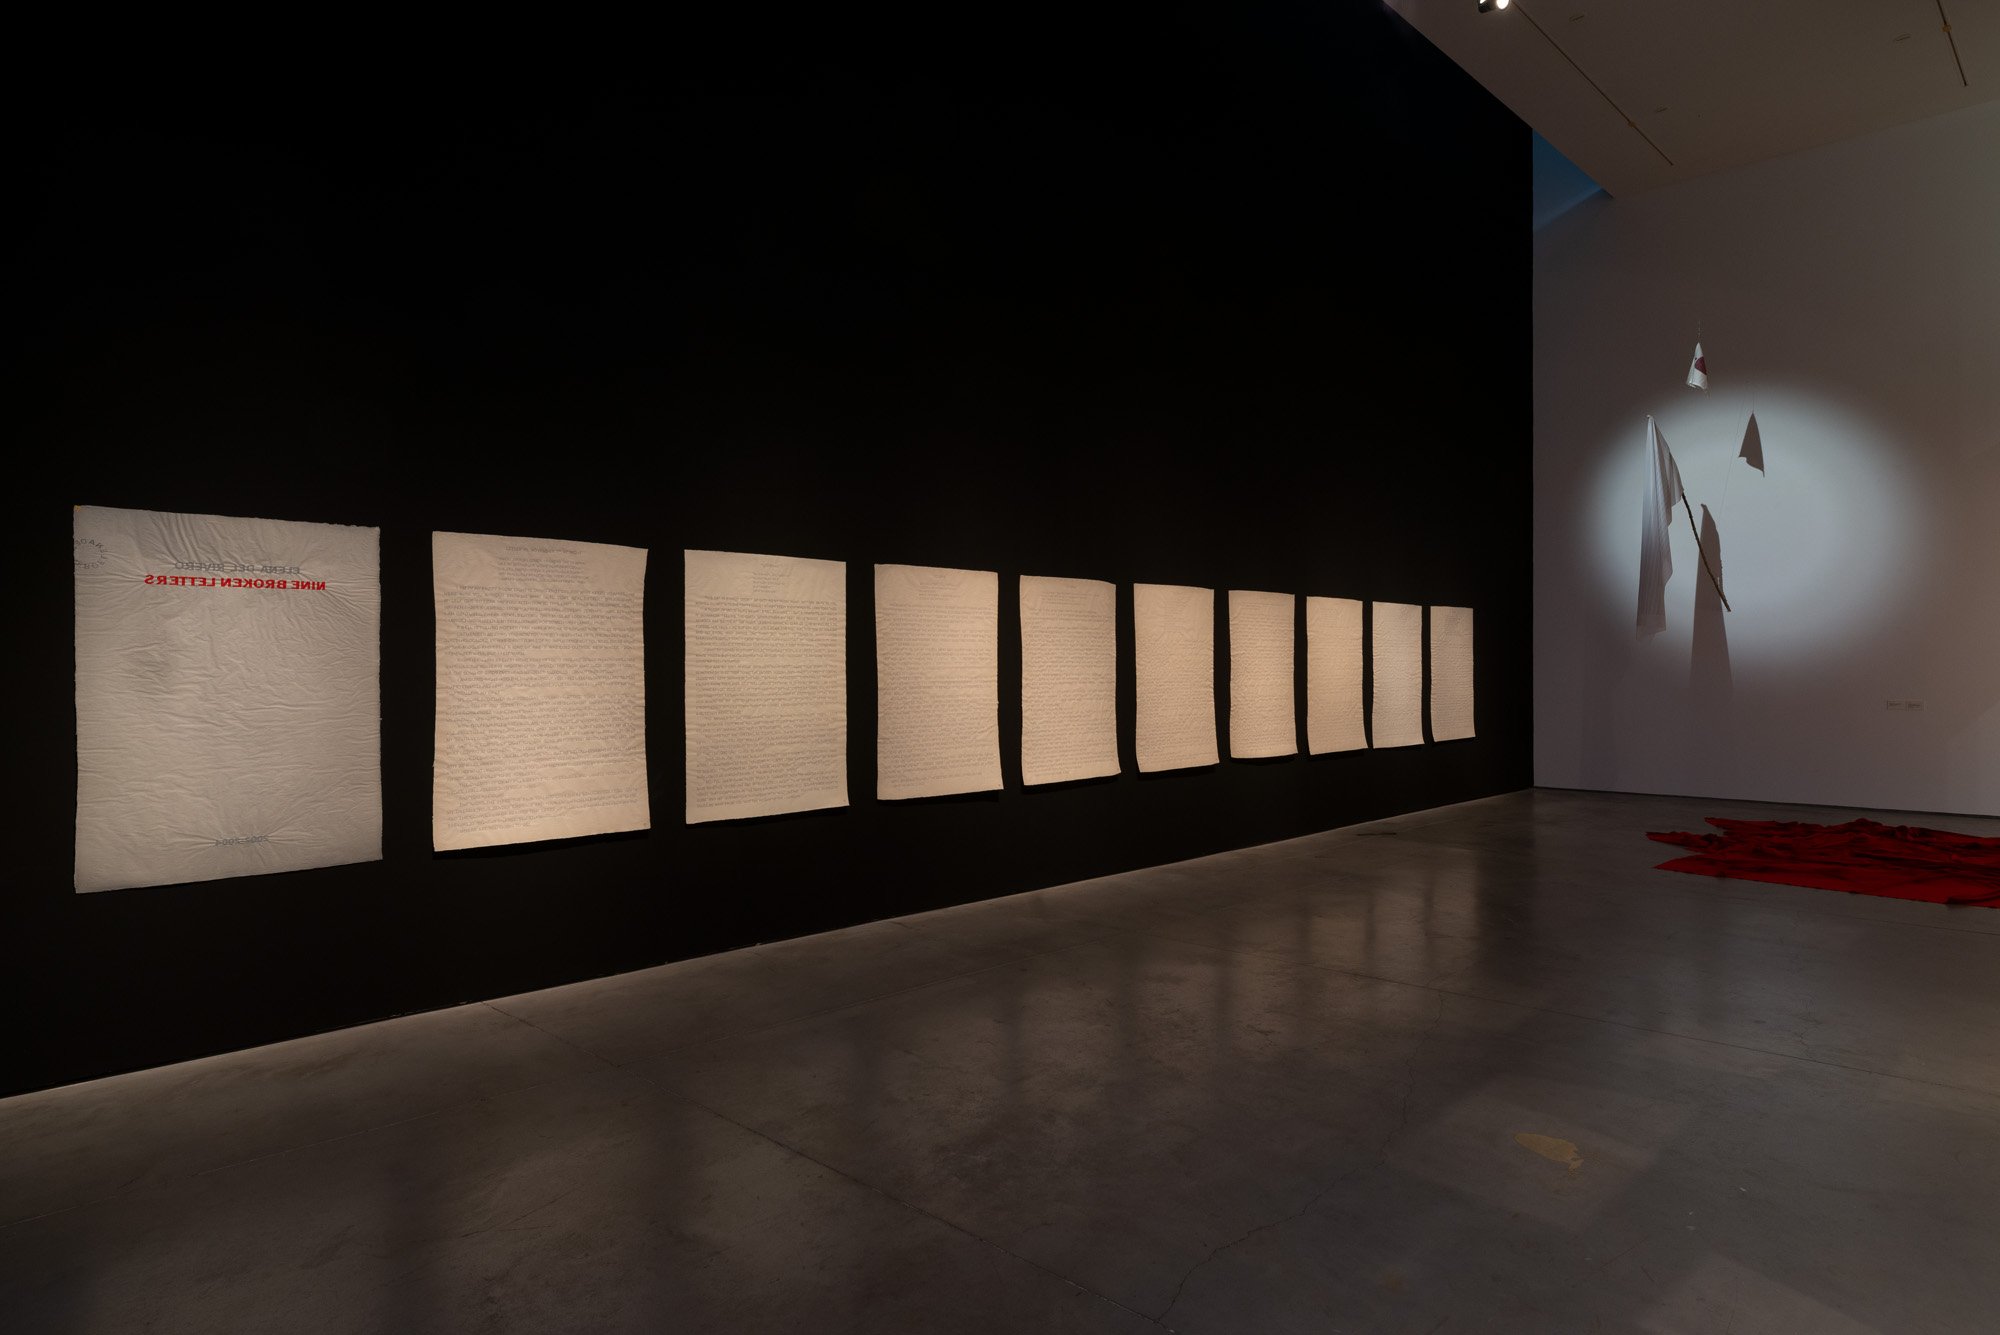  The Archive of Dust, Installation views of  Nine Broken Letters , Es Baluard, Museum of Contemporary Art, Palma de Mallorca, SP, 2021, curated by Mateo Feijoo 